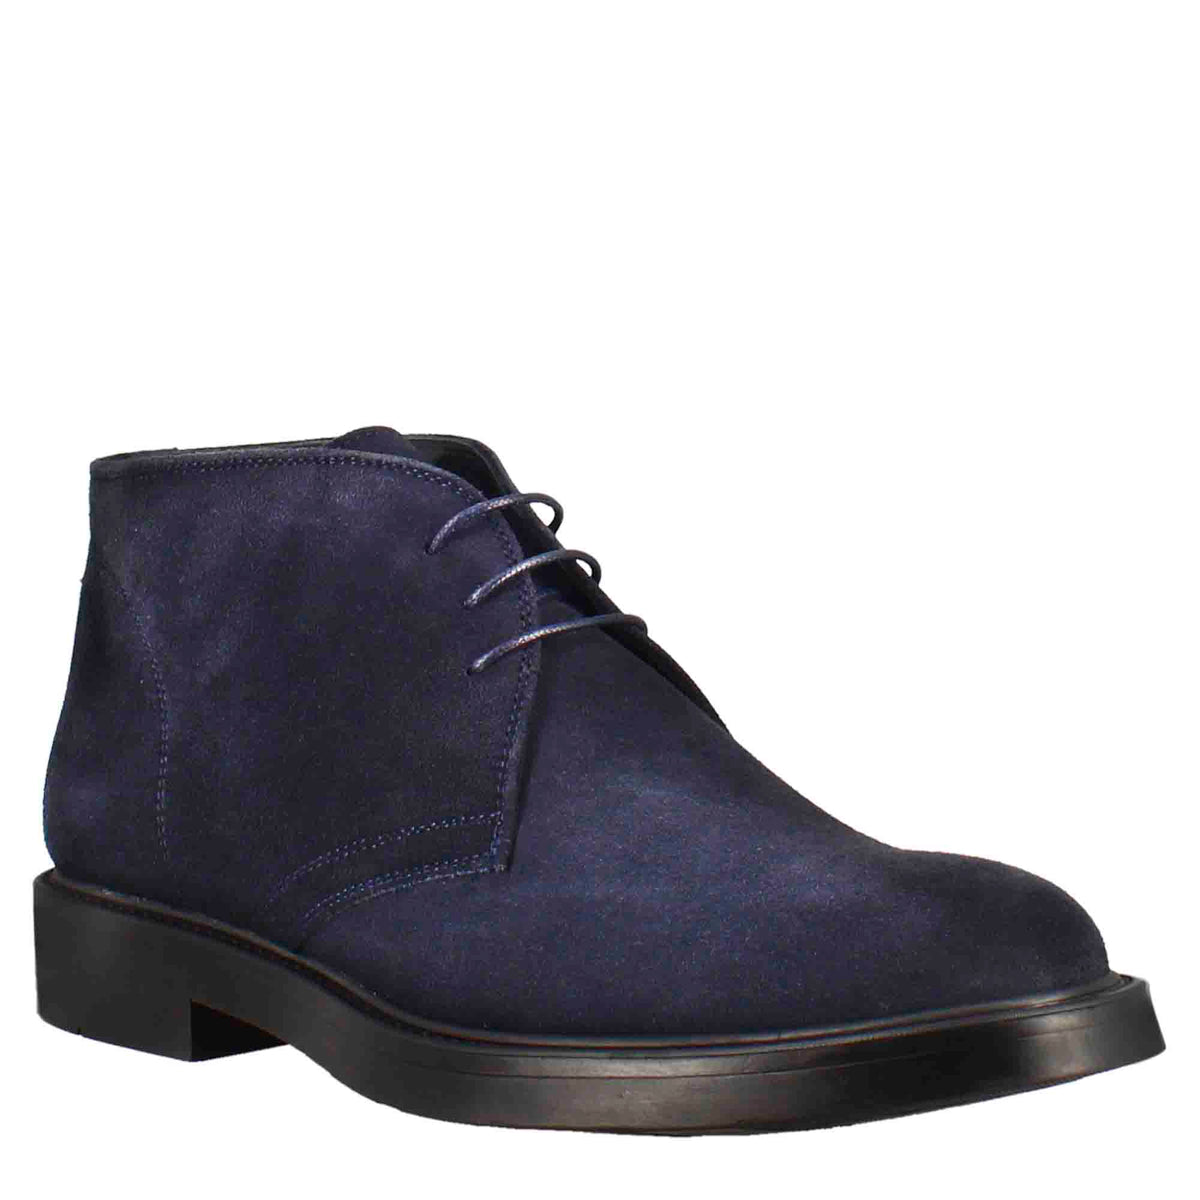 Smooth men's ankle boot in dark blue suede leather